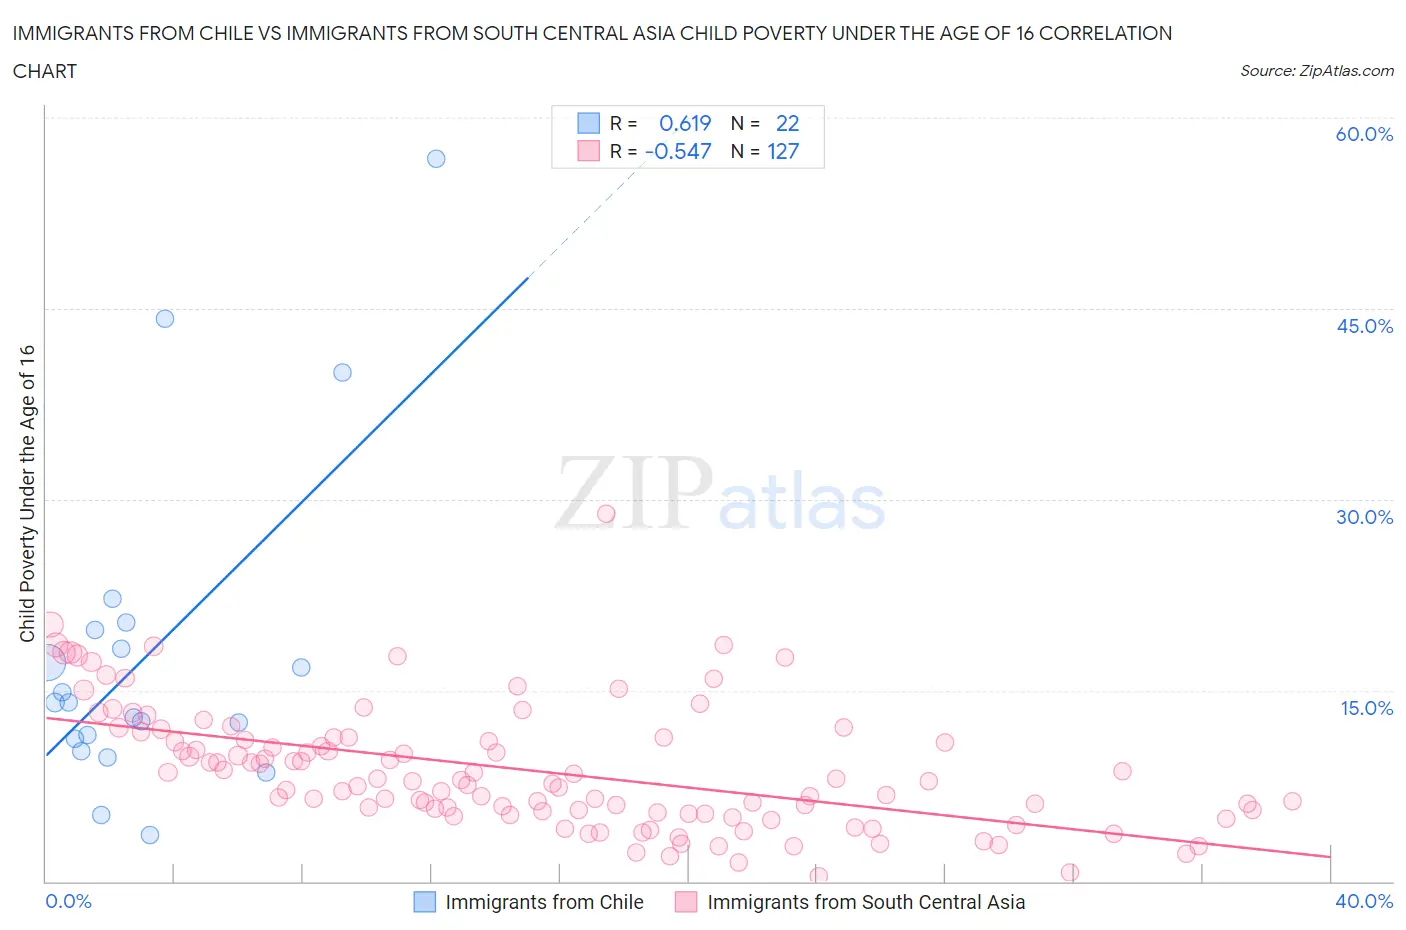 Immigrants from Chile vs Immigrants from South Central Asia Child Poverty Under the Age of 16